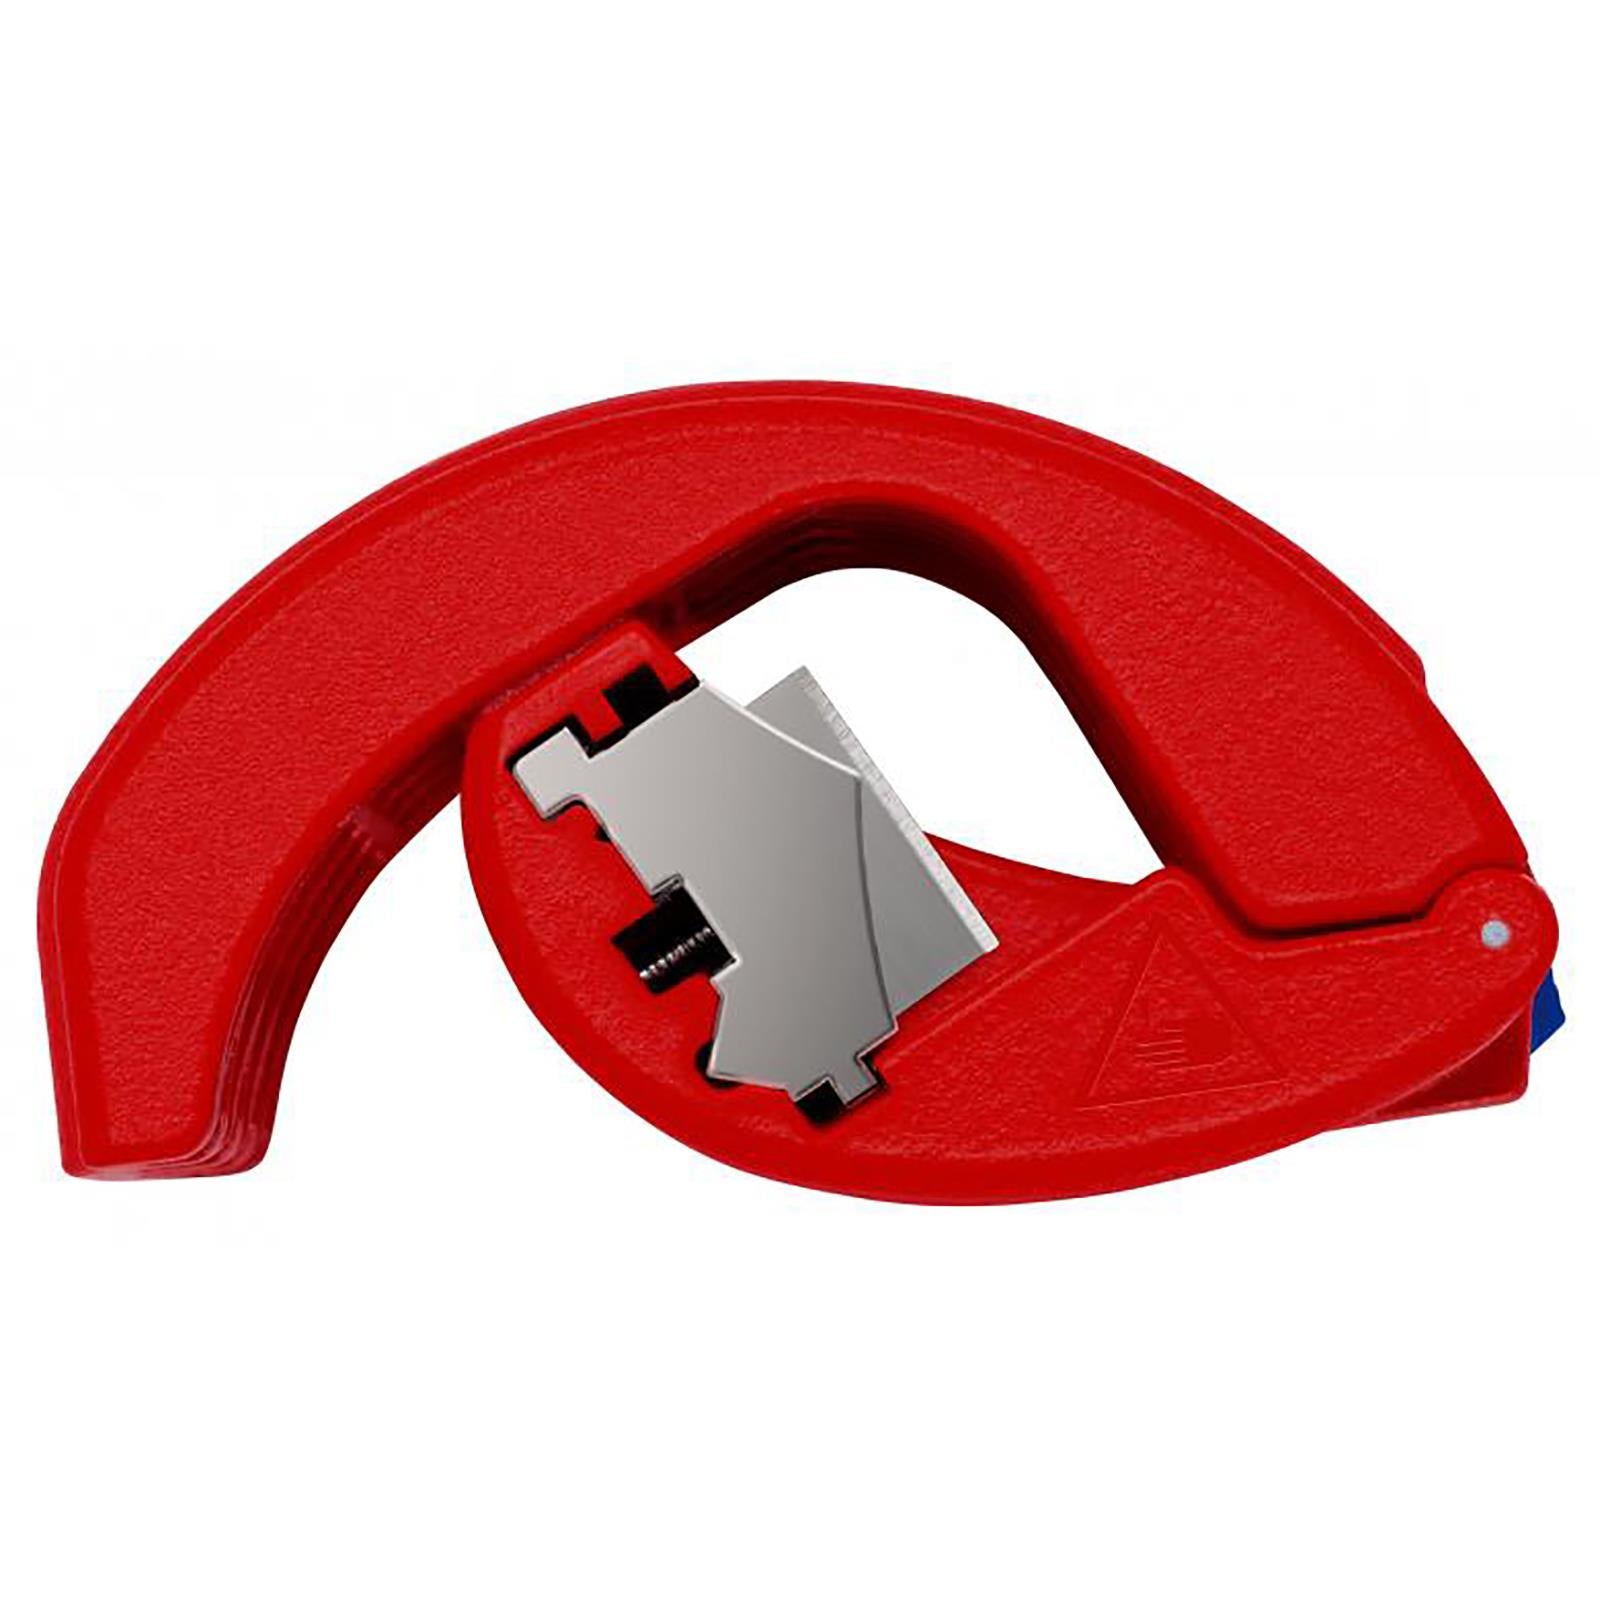 Knipex BIX Cutter for Plastic Pipes and Sealing Sleeves for 20-50mm Pipes 90 22 10 BK